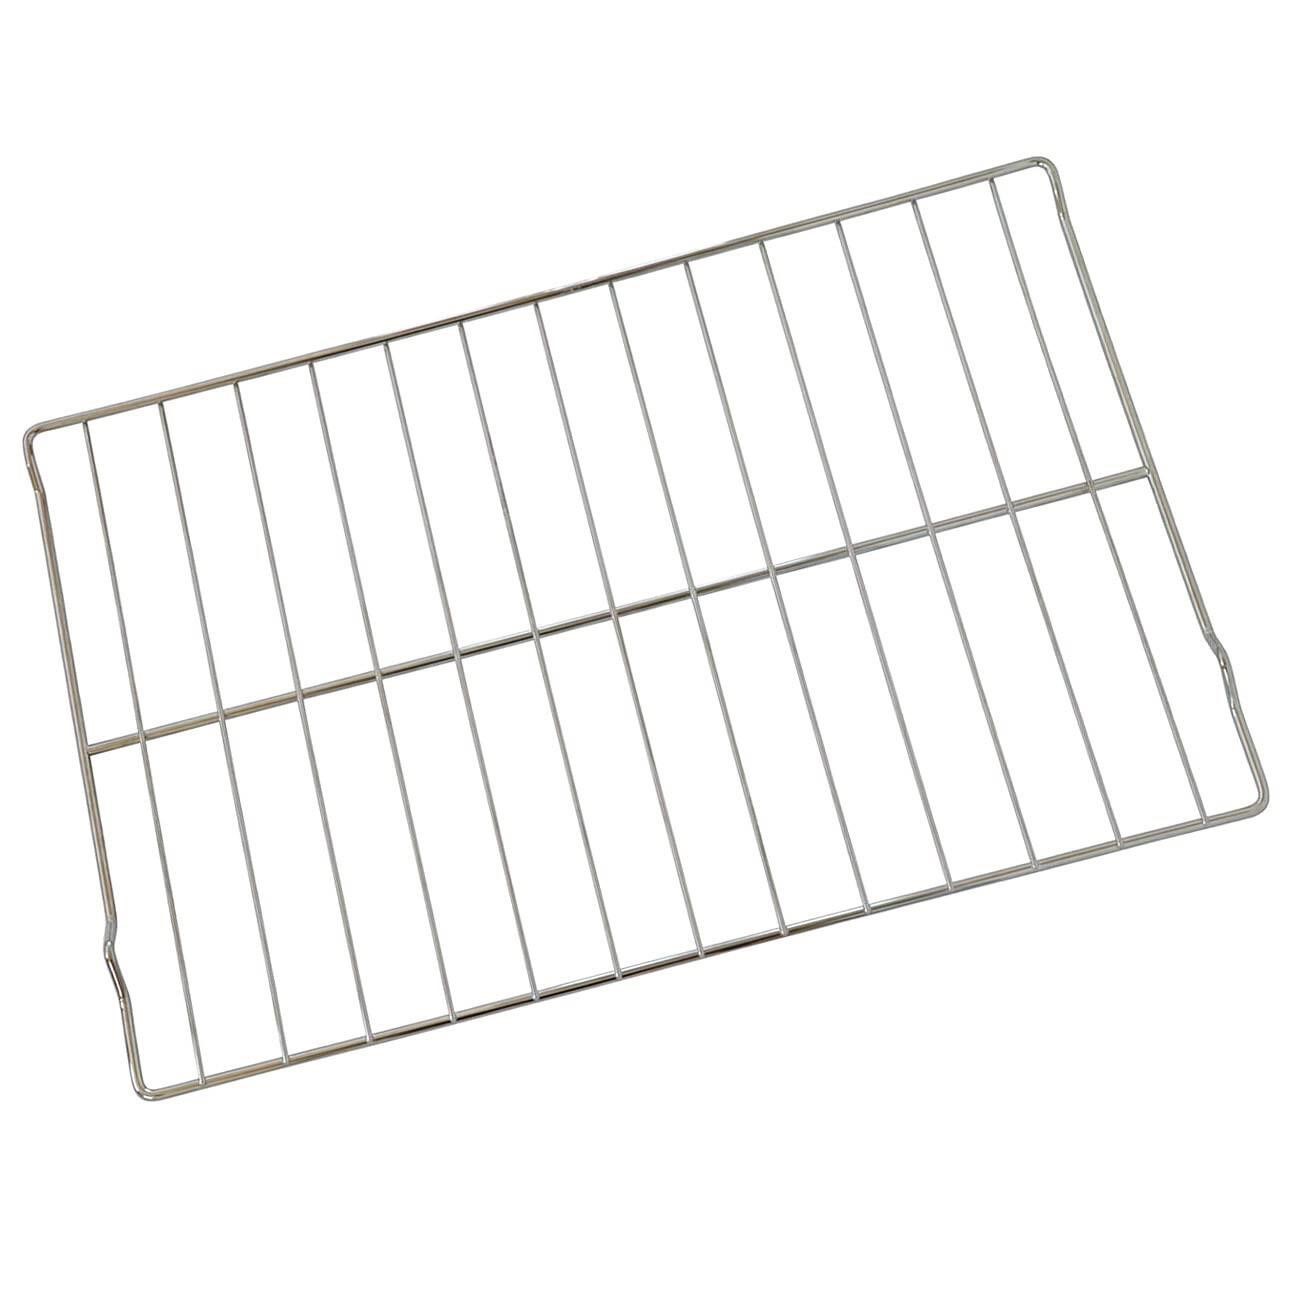 W10256908 Oven Rack for Range Compatible With Whir